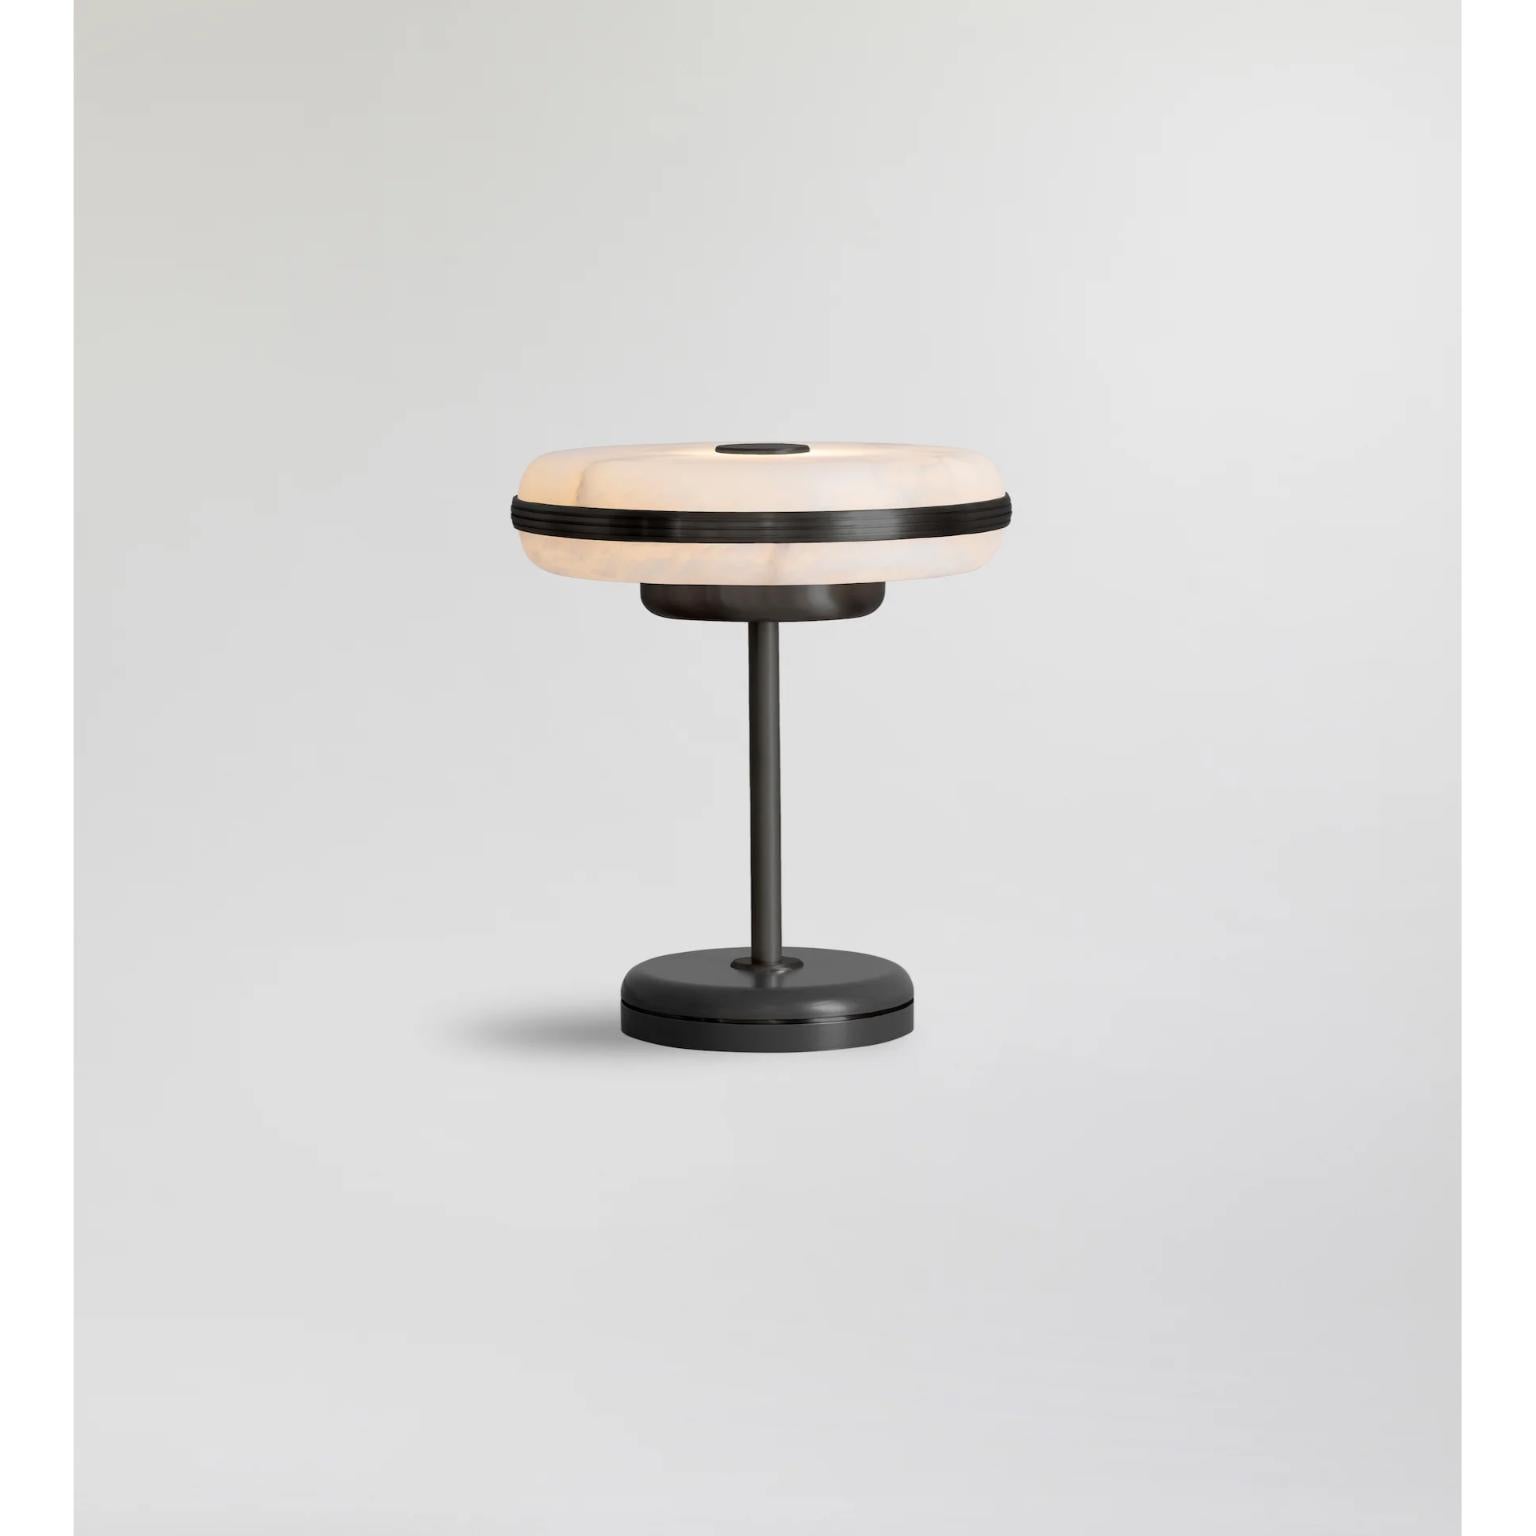 Beran Dark Bronze Small Table Lamp by Bert Frank
Dimensions: Ø 26 x H 28 cm.
Materials: Bronze and alabaster.
Base finish: Satin black.

Available in two different sizes. Available in different finishes and materials. Please contact us. 

The